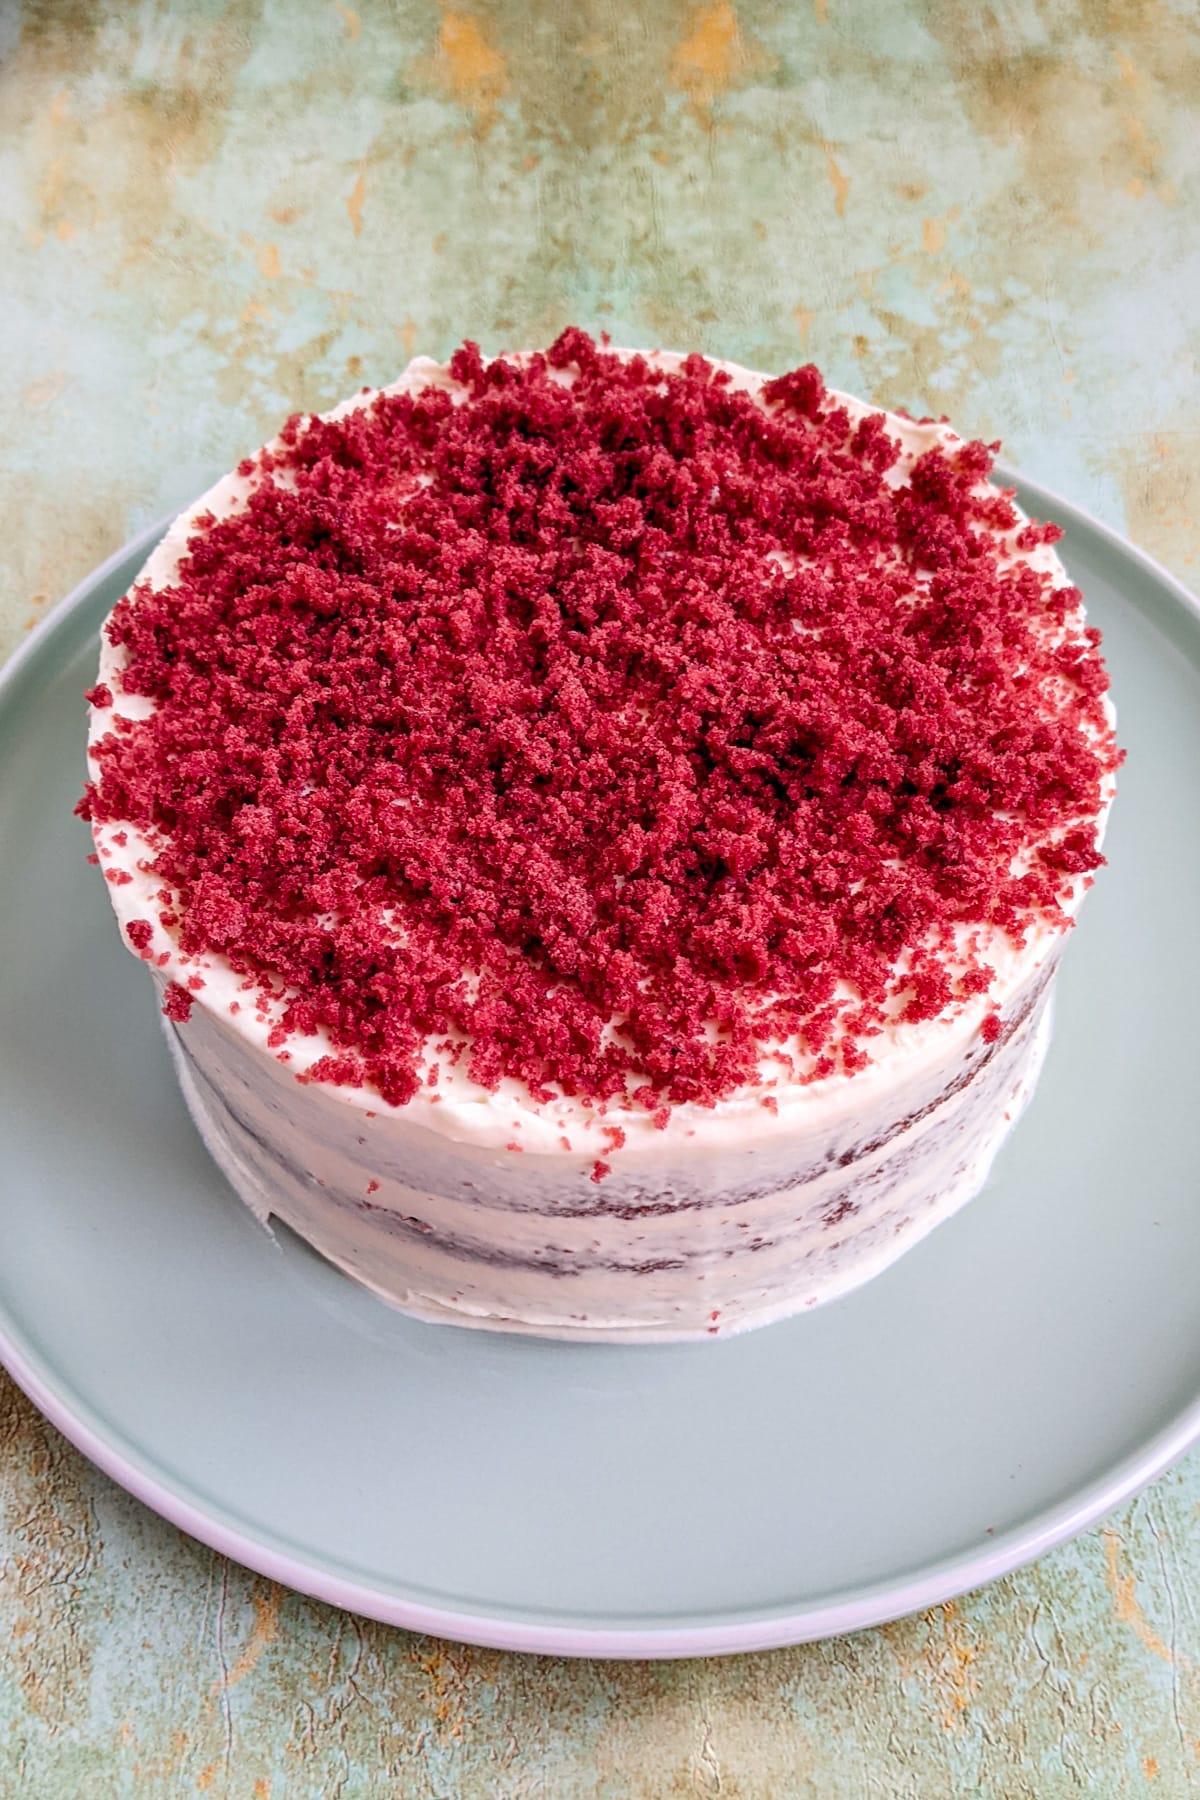 Top red velvet cake on a light blue plate on a marble table.